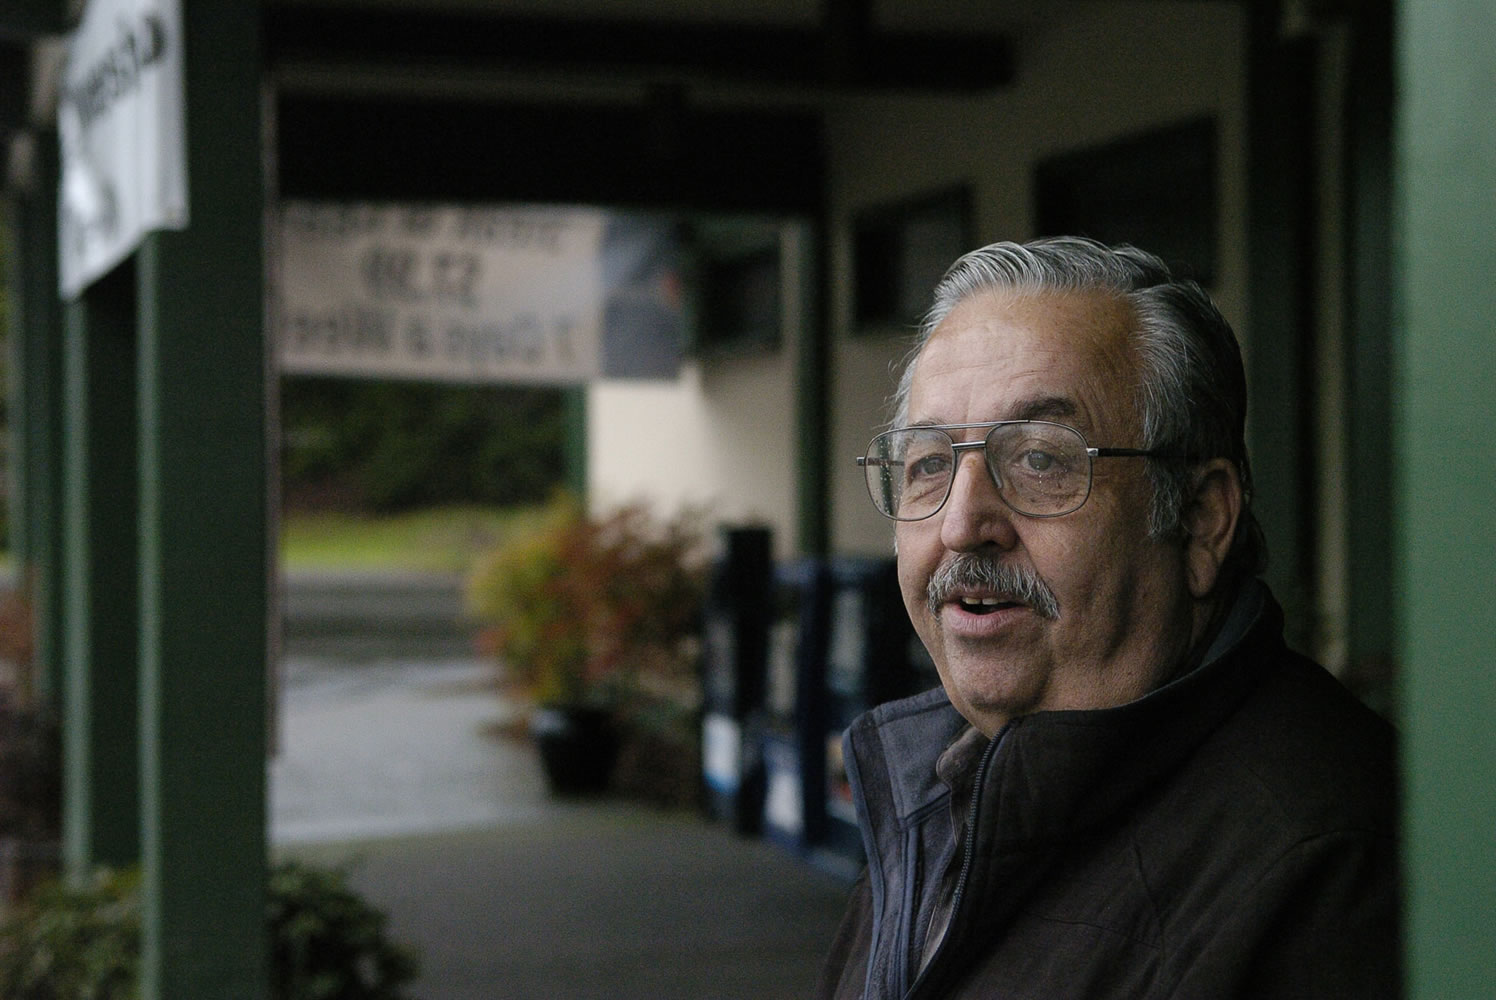 Woodland City Councilor John J. Burke stands at the front entrance of the Oak Tree Casino Restaurant, which shut down in December.